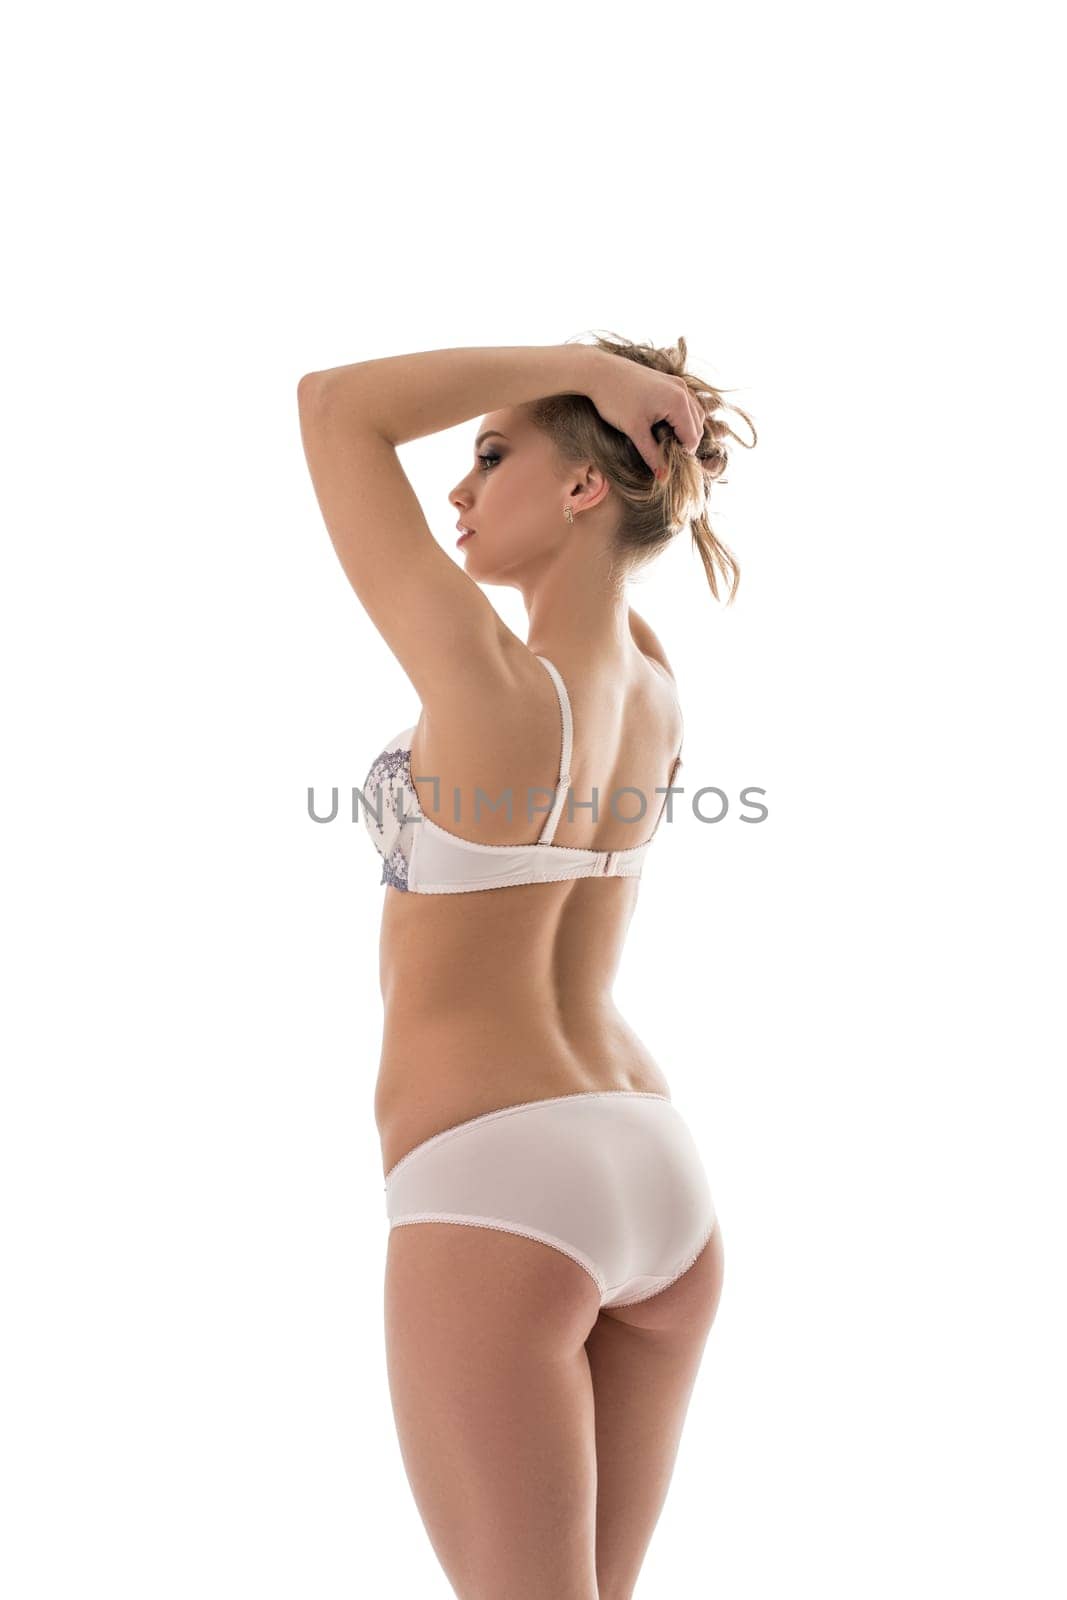 Catalog of underwear. Sexy woman shows pale pink model